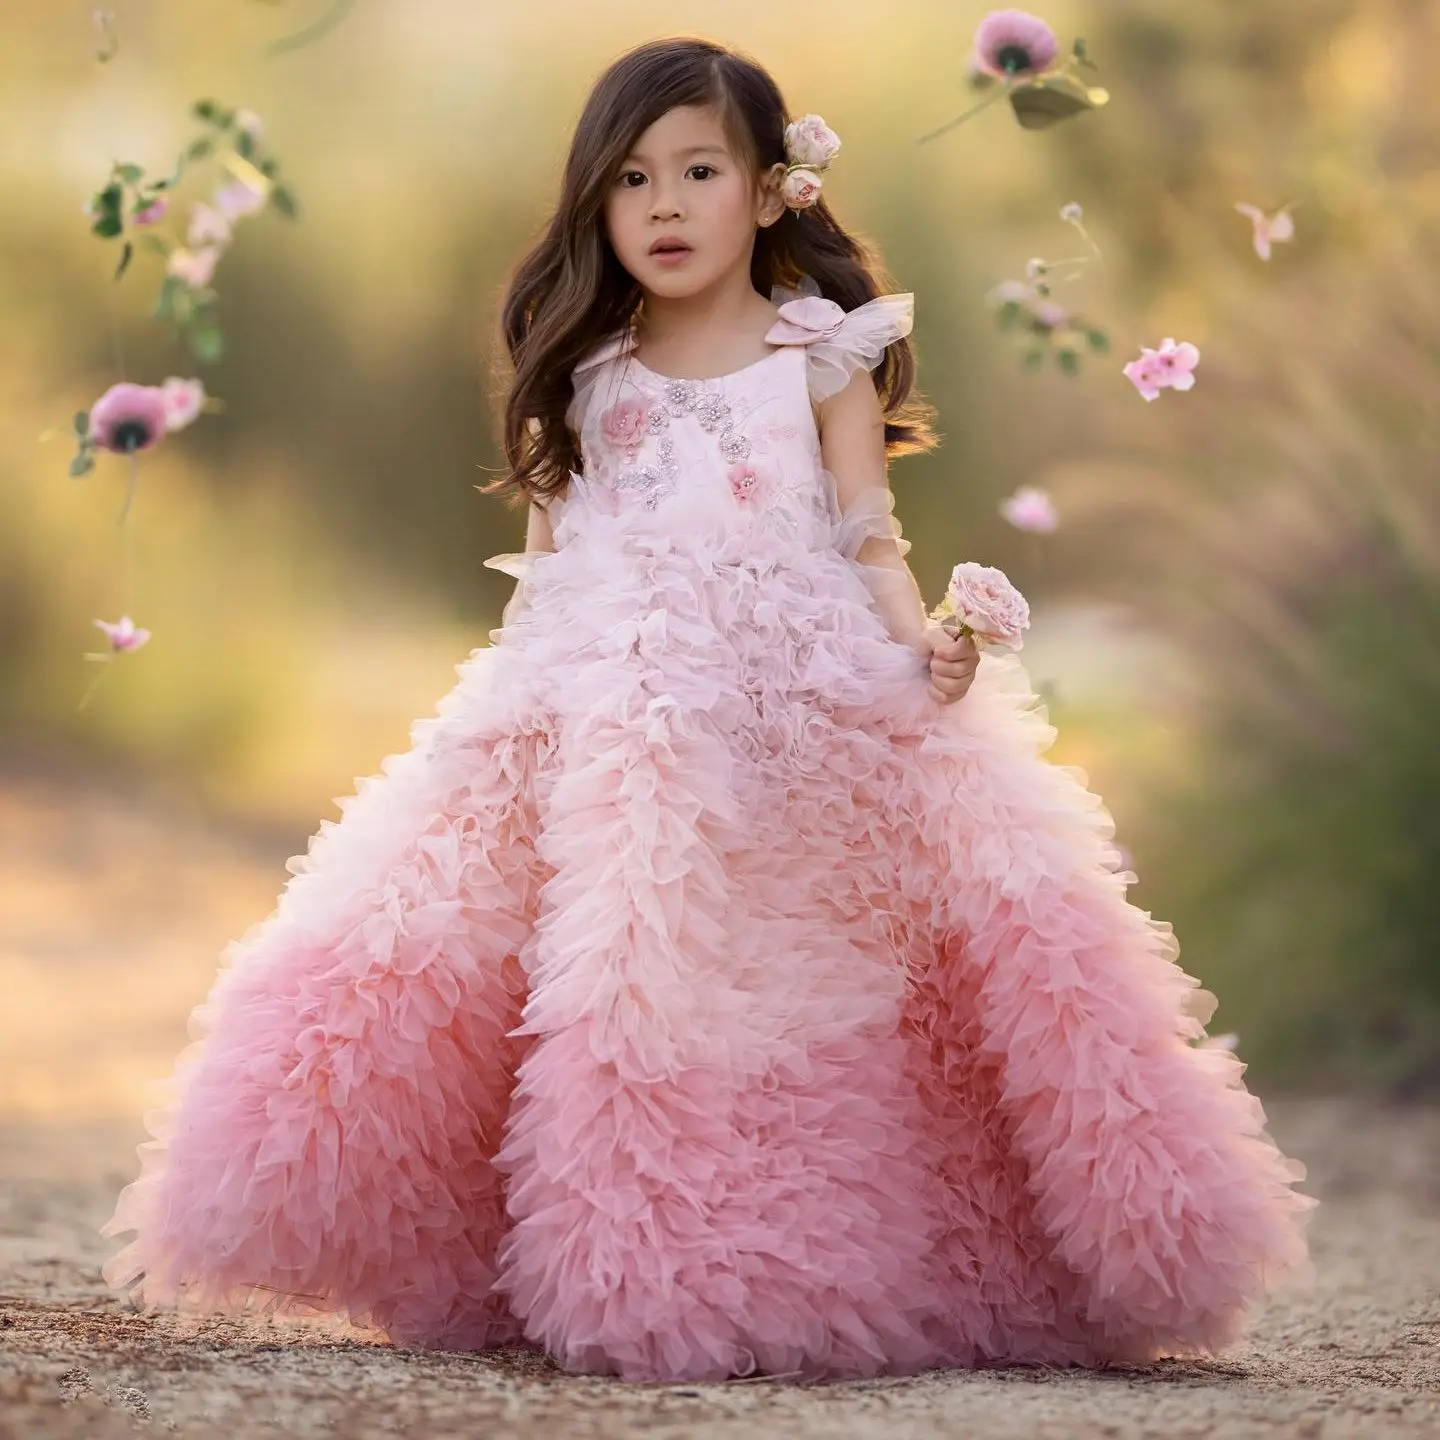 

Extra Puffy Pink Ball Gown Flower Girl Dresses Tiered Ruffles Kids Birthday Gowns Beads Children Wedding Party Guest Dress